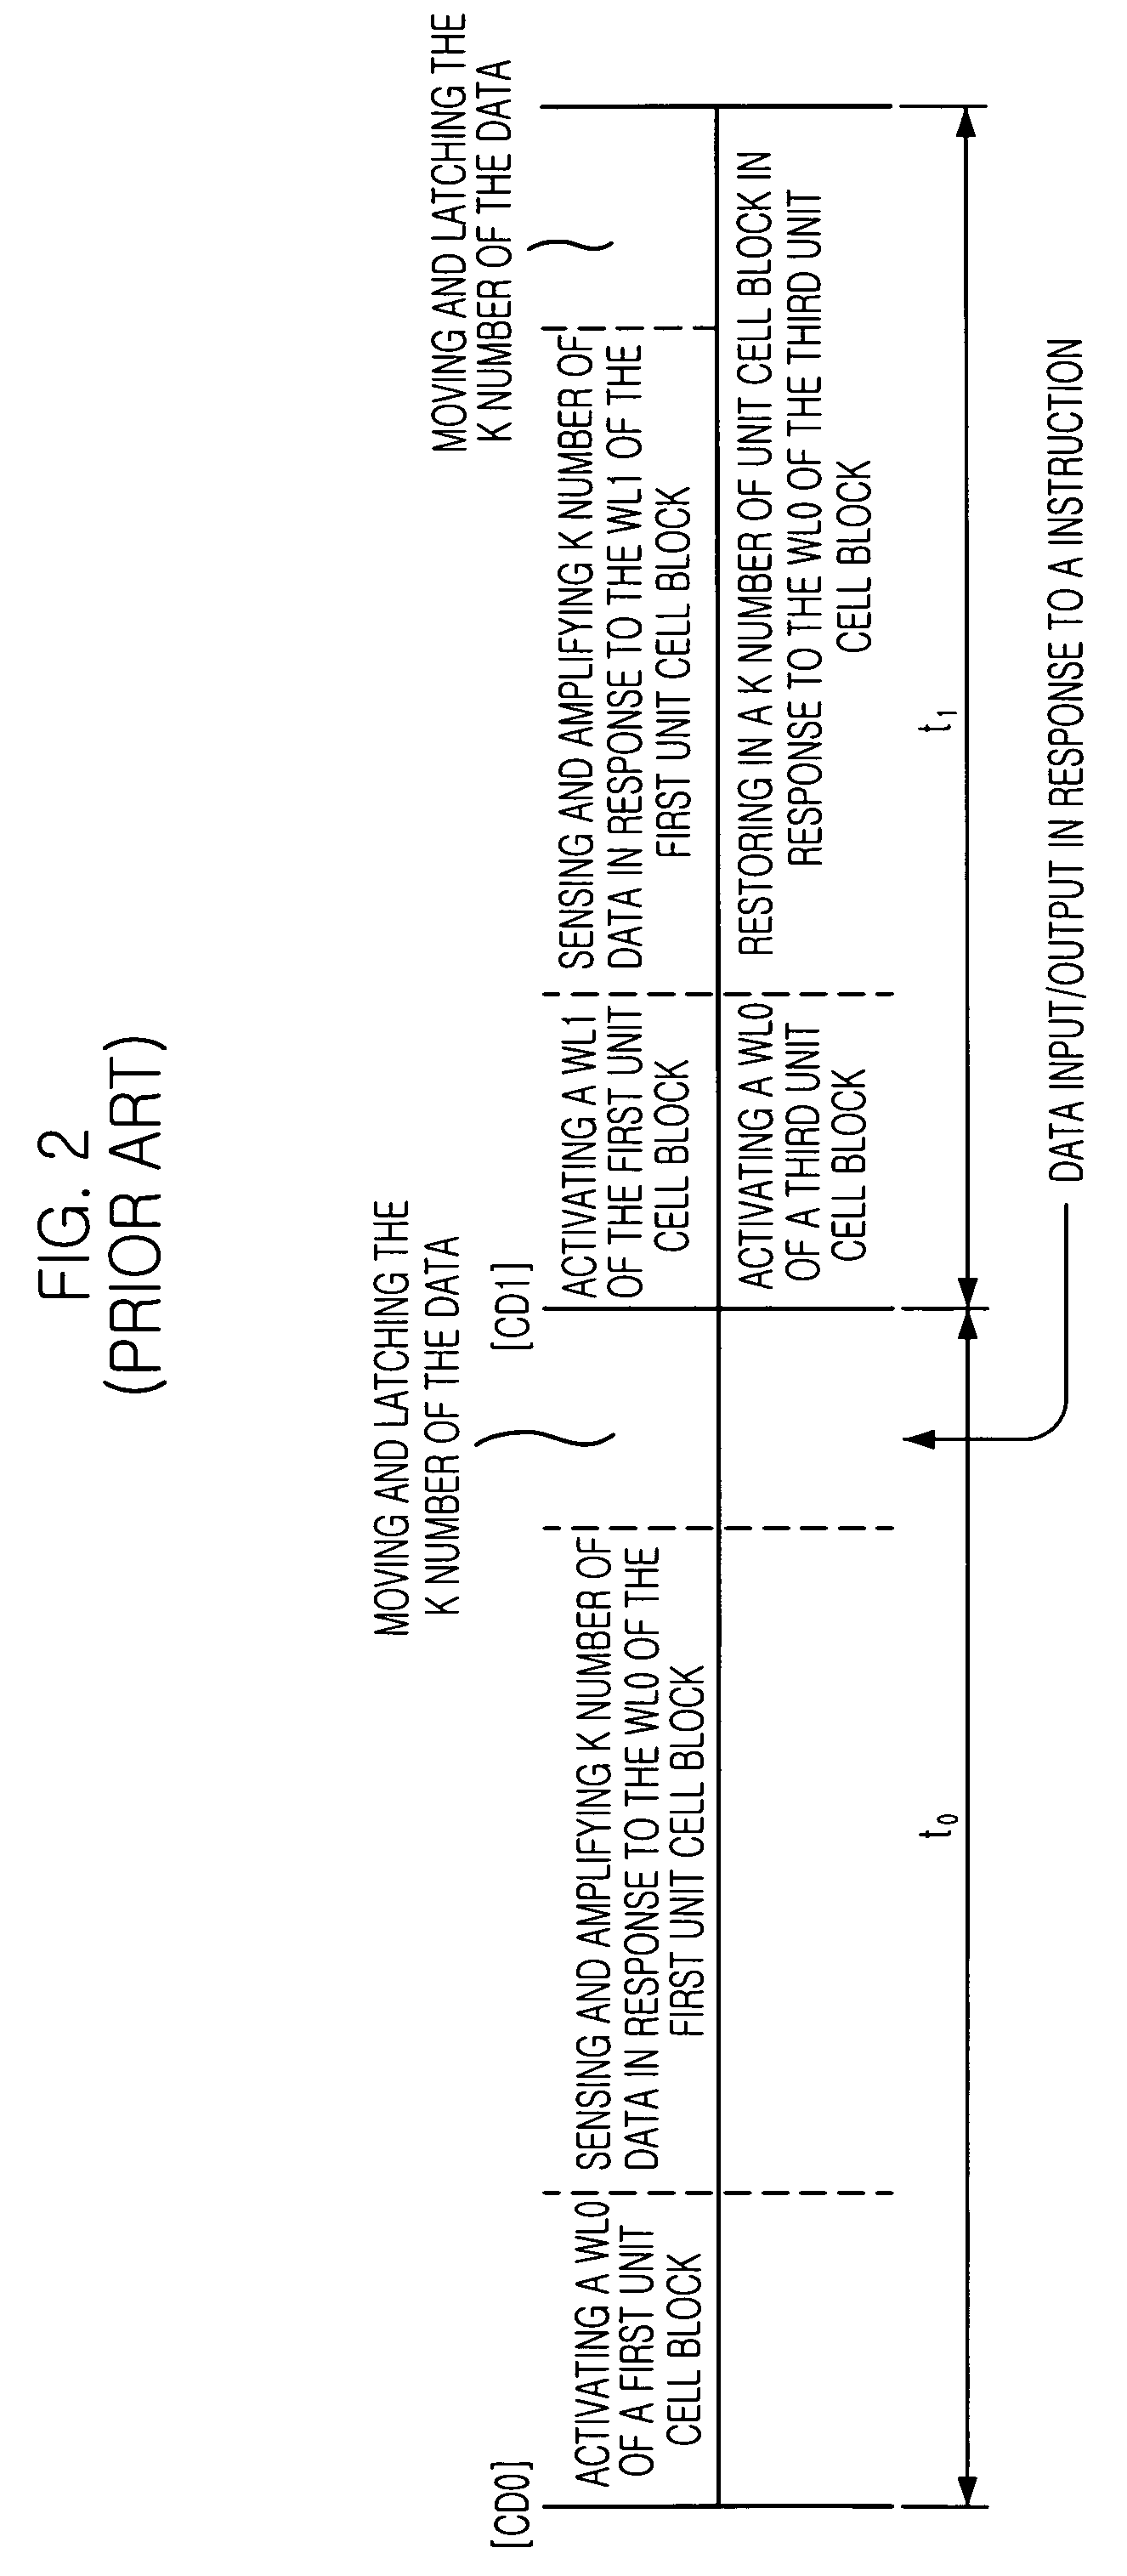 Semiconductor memory device for controlling cell block with state machine